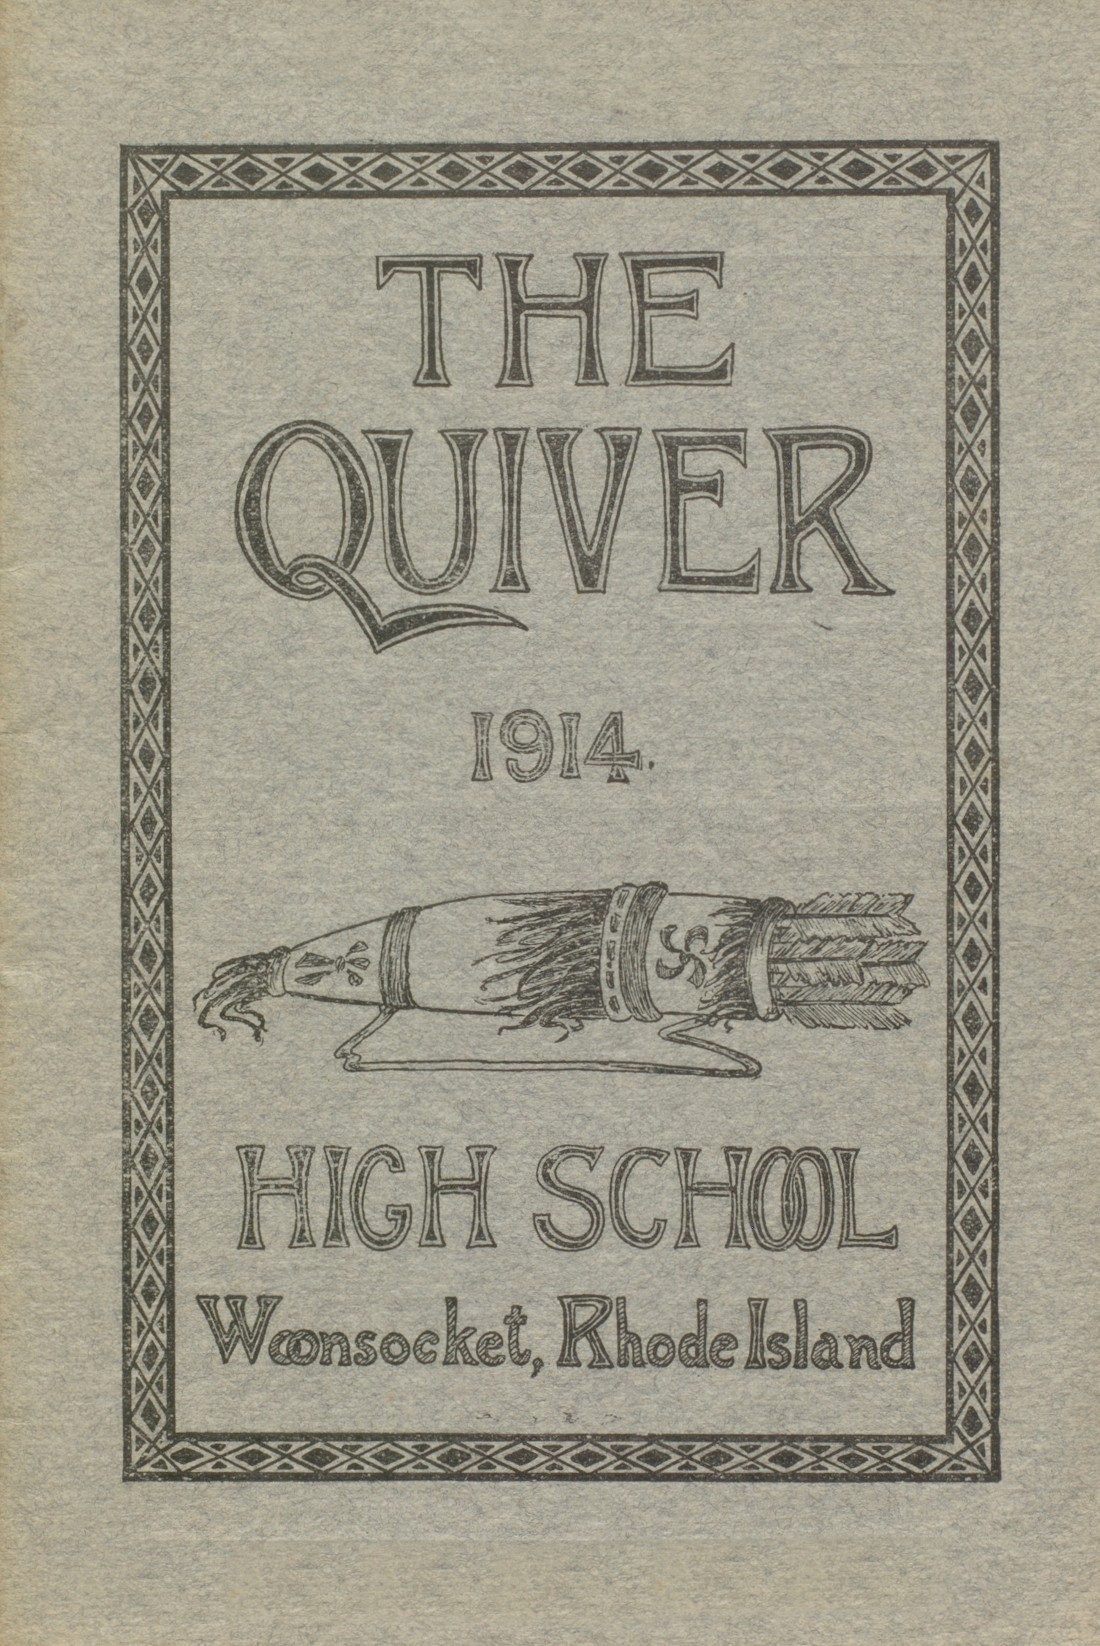 1914 yearbook from Woonsocket High School from Woonsocket, Rhode Island